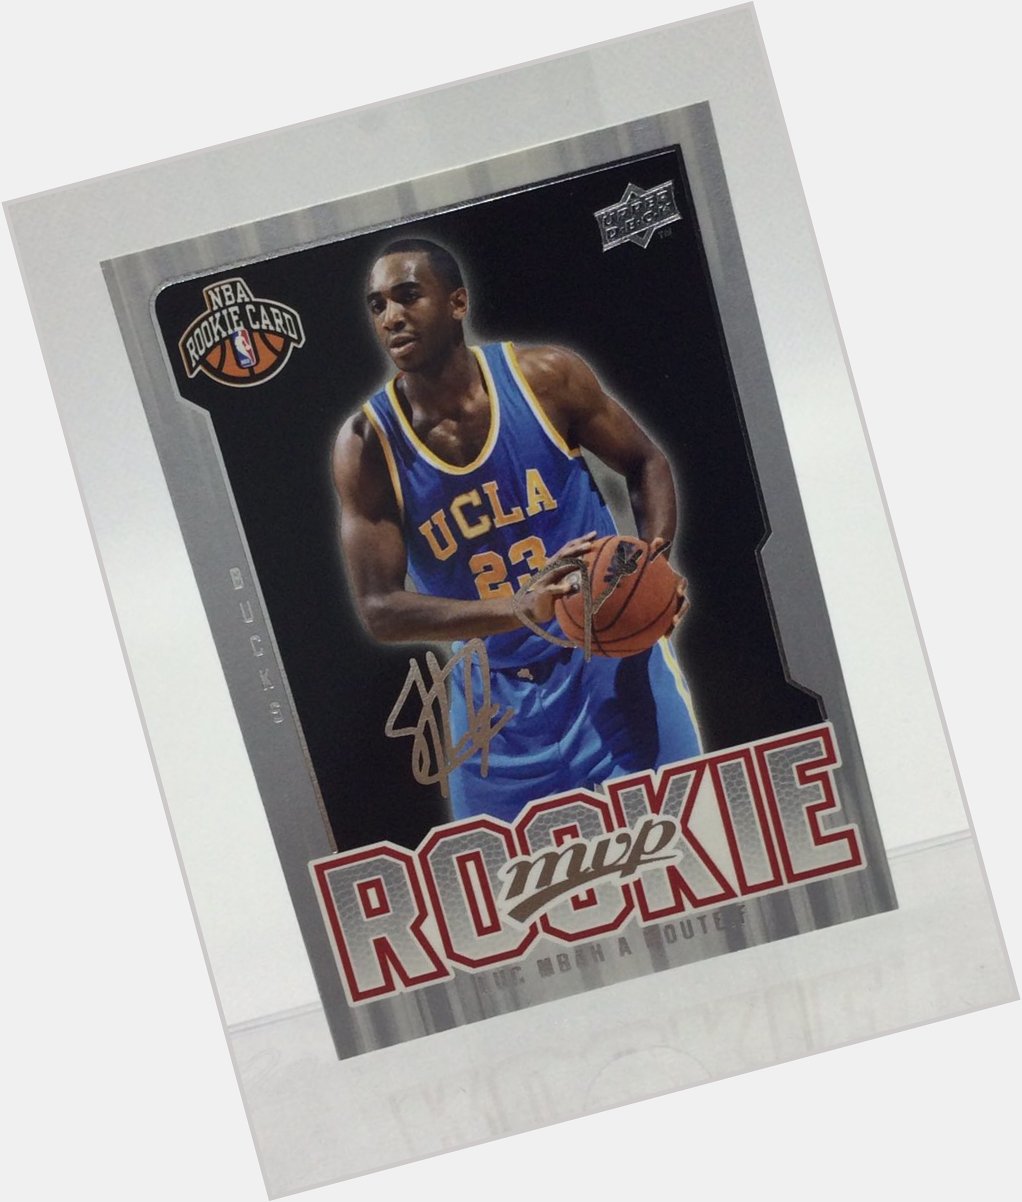 Happy birthday Luc Mbah a Moute.  